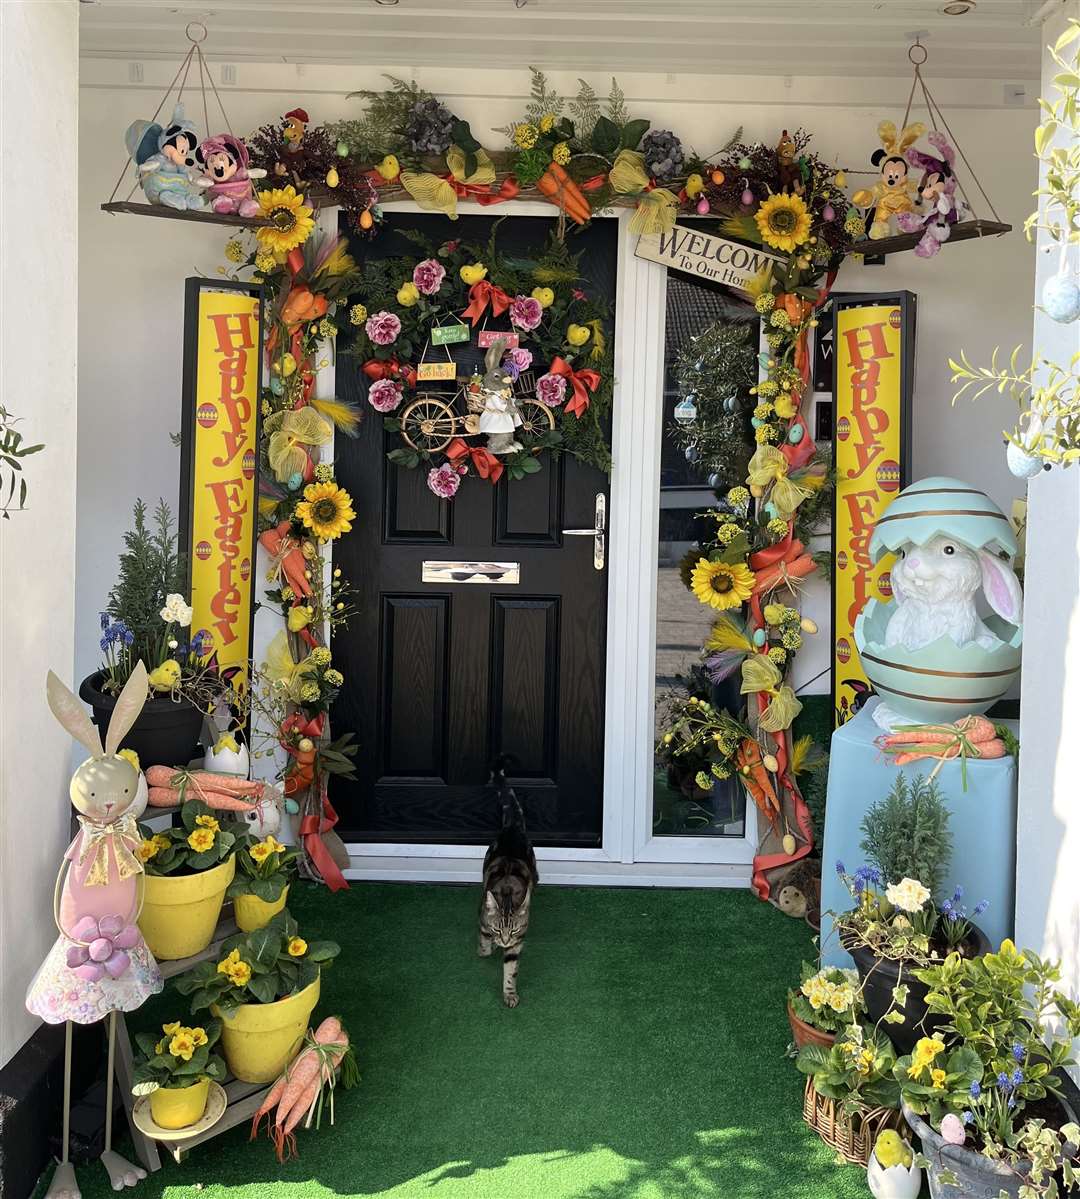 This year's front door display. Picture: Lavinia Hedges